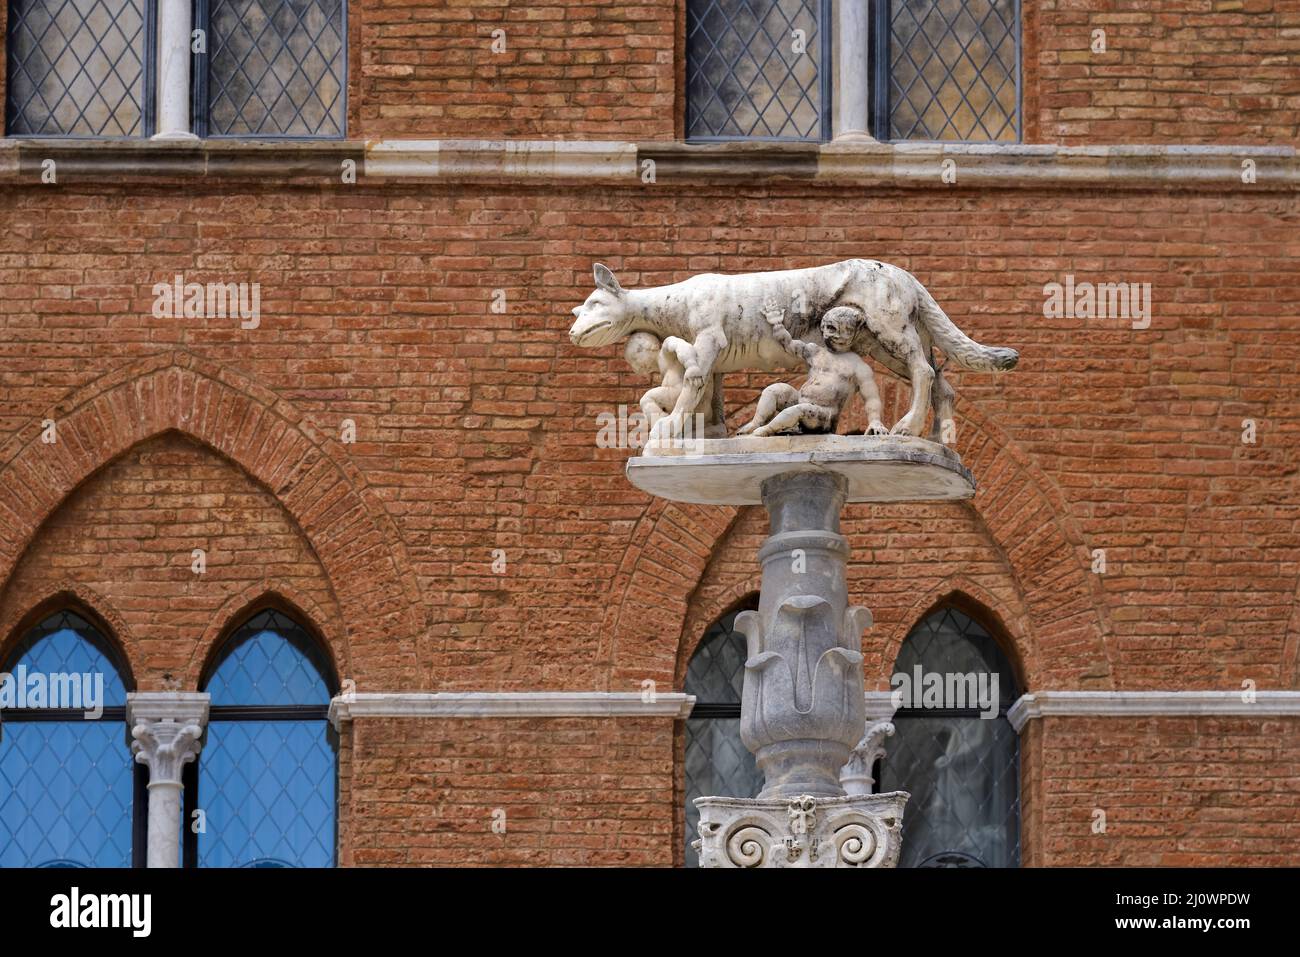 SIENNA, TUSCANY, ITALY - MAY 18 : She-wolf with infants Romulus and Remus near the Cathedral in Sienna, Tuscany, Italy on May 18 Stock Photo